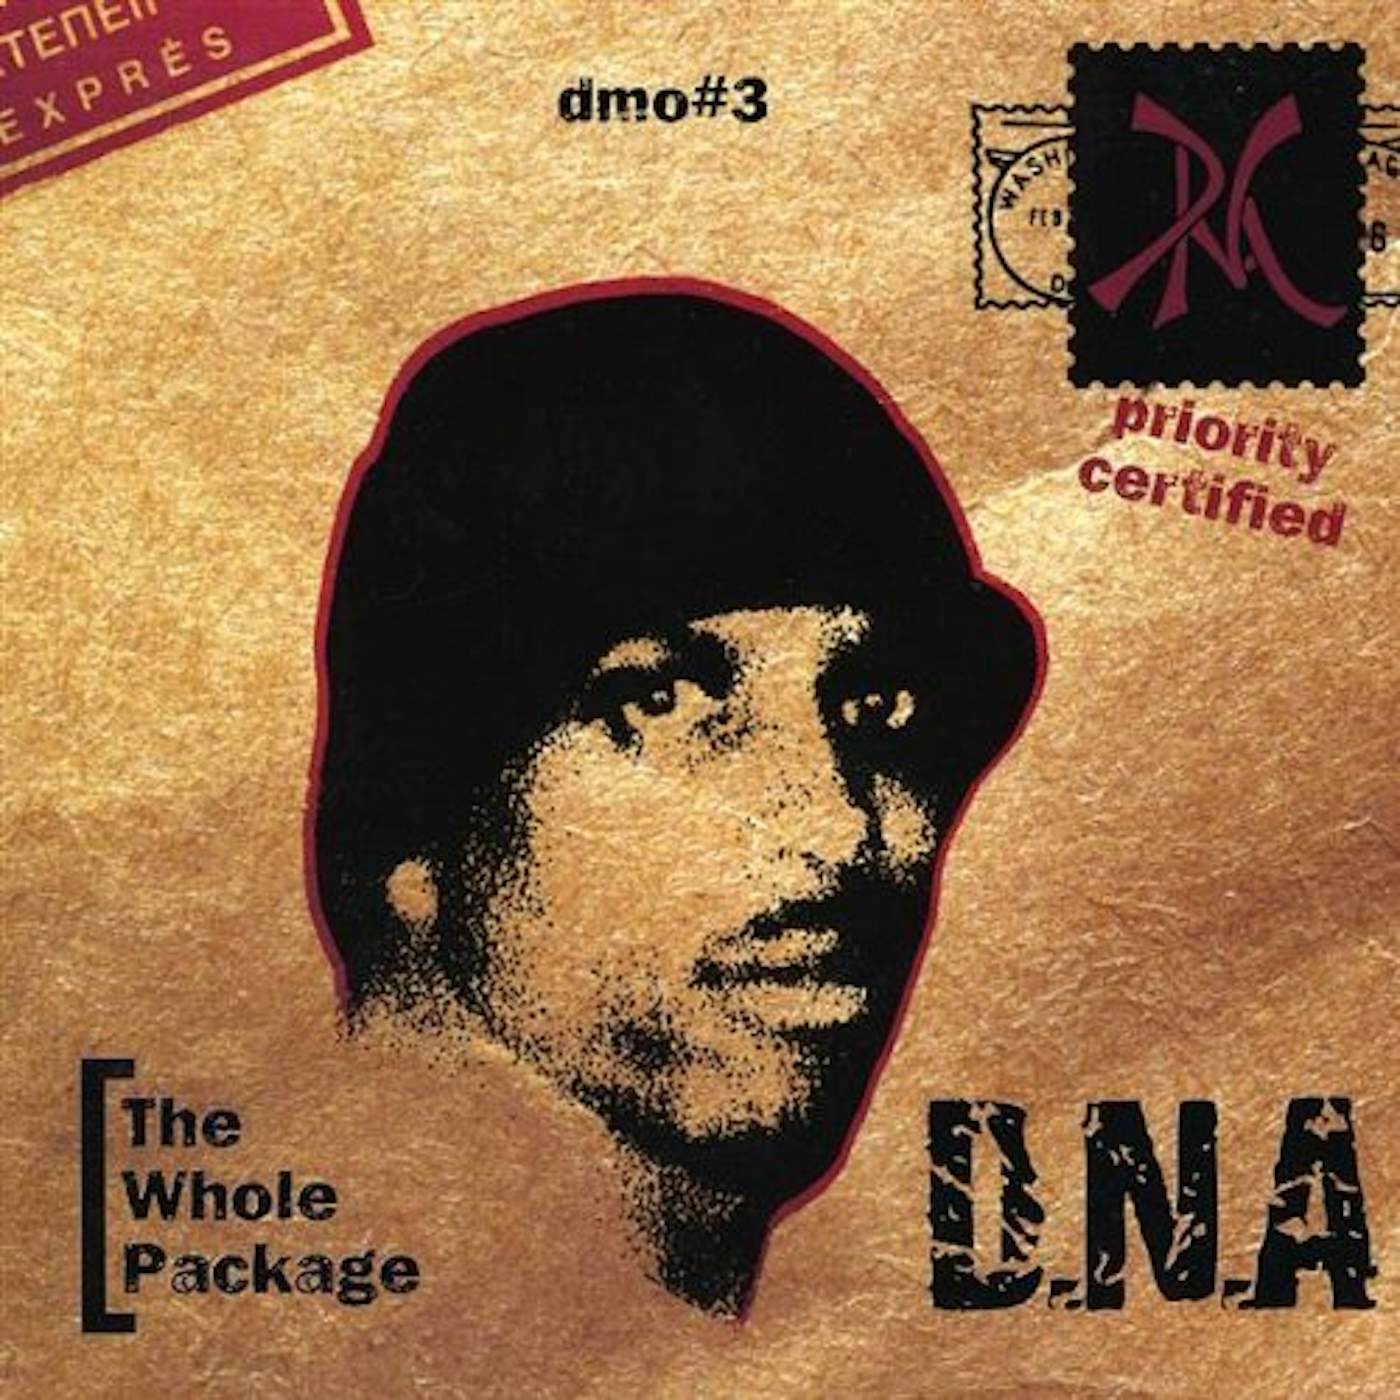 D-A-A-N DMO#3 THE WHOLE PACKAGE CD